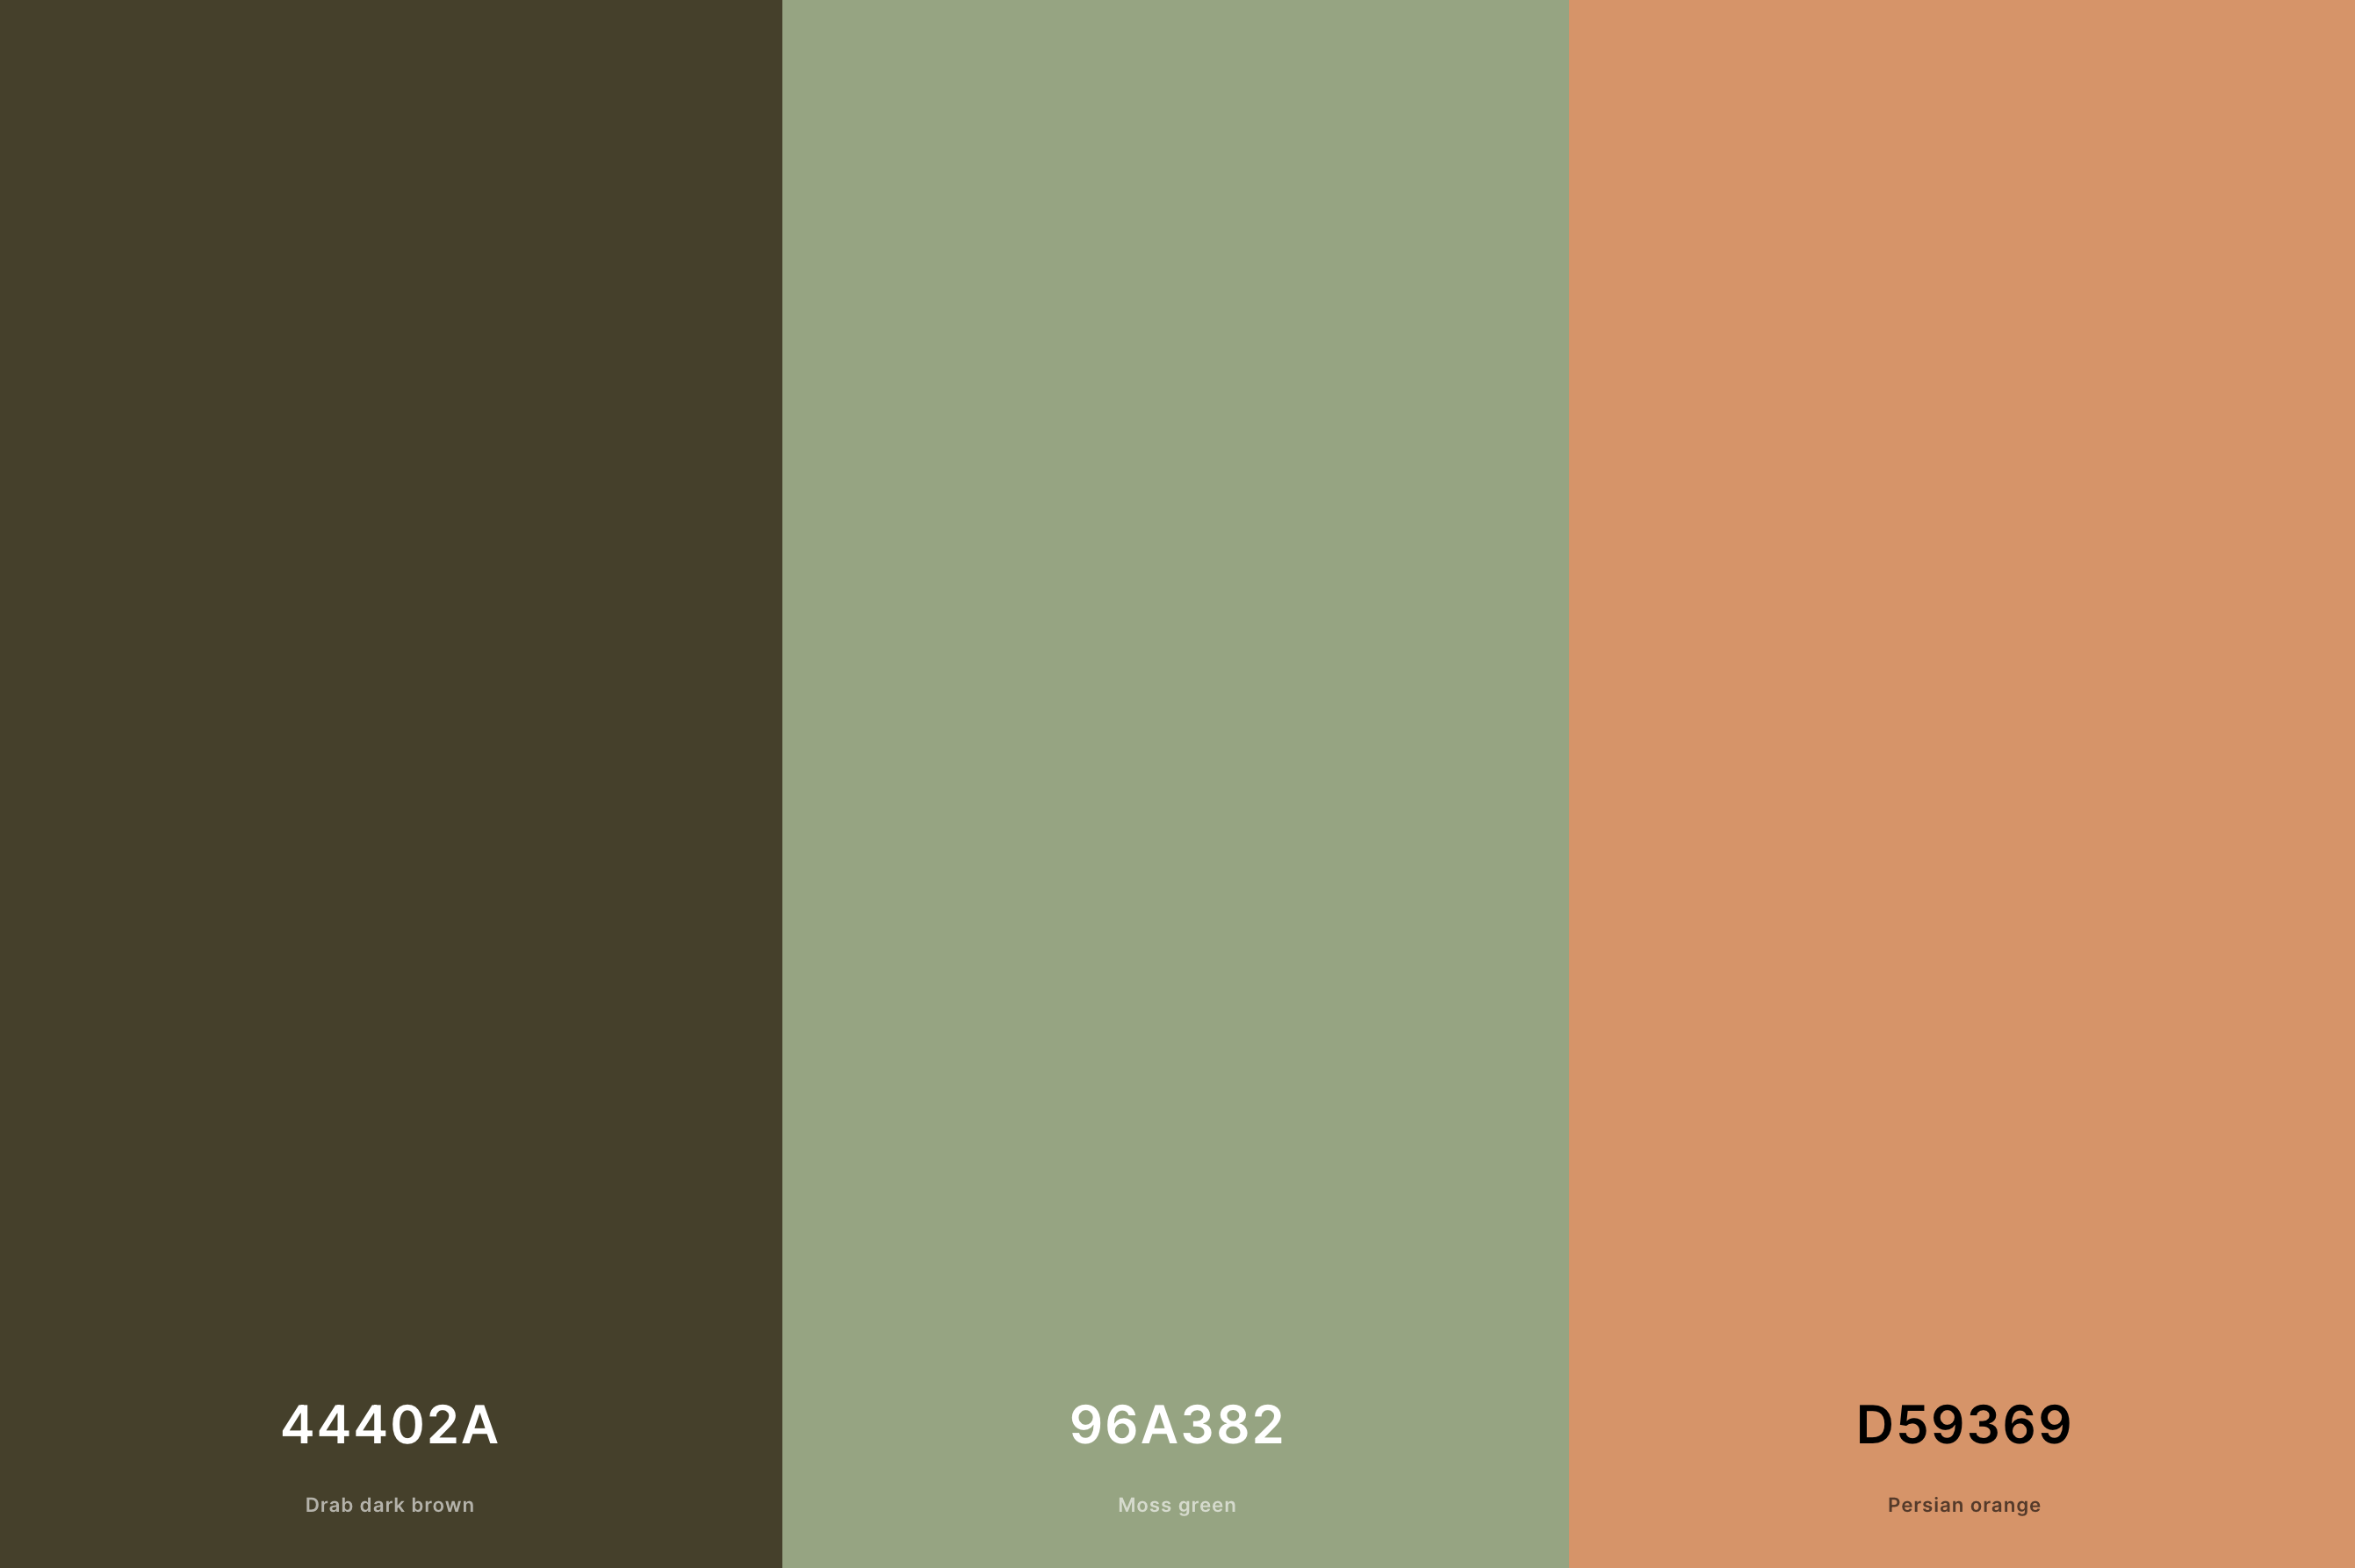 13. Olive Green and Warm Peach Color Palette with Drab Dark Brown (Hex #44402A) + Moss Green (Hex #96A382) + Persian Orange (Hex #D59369) with Hex Codes